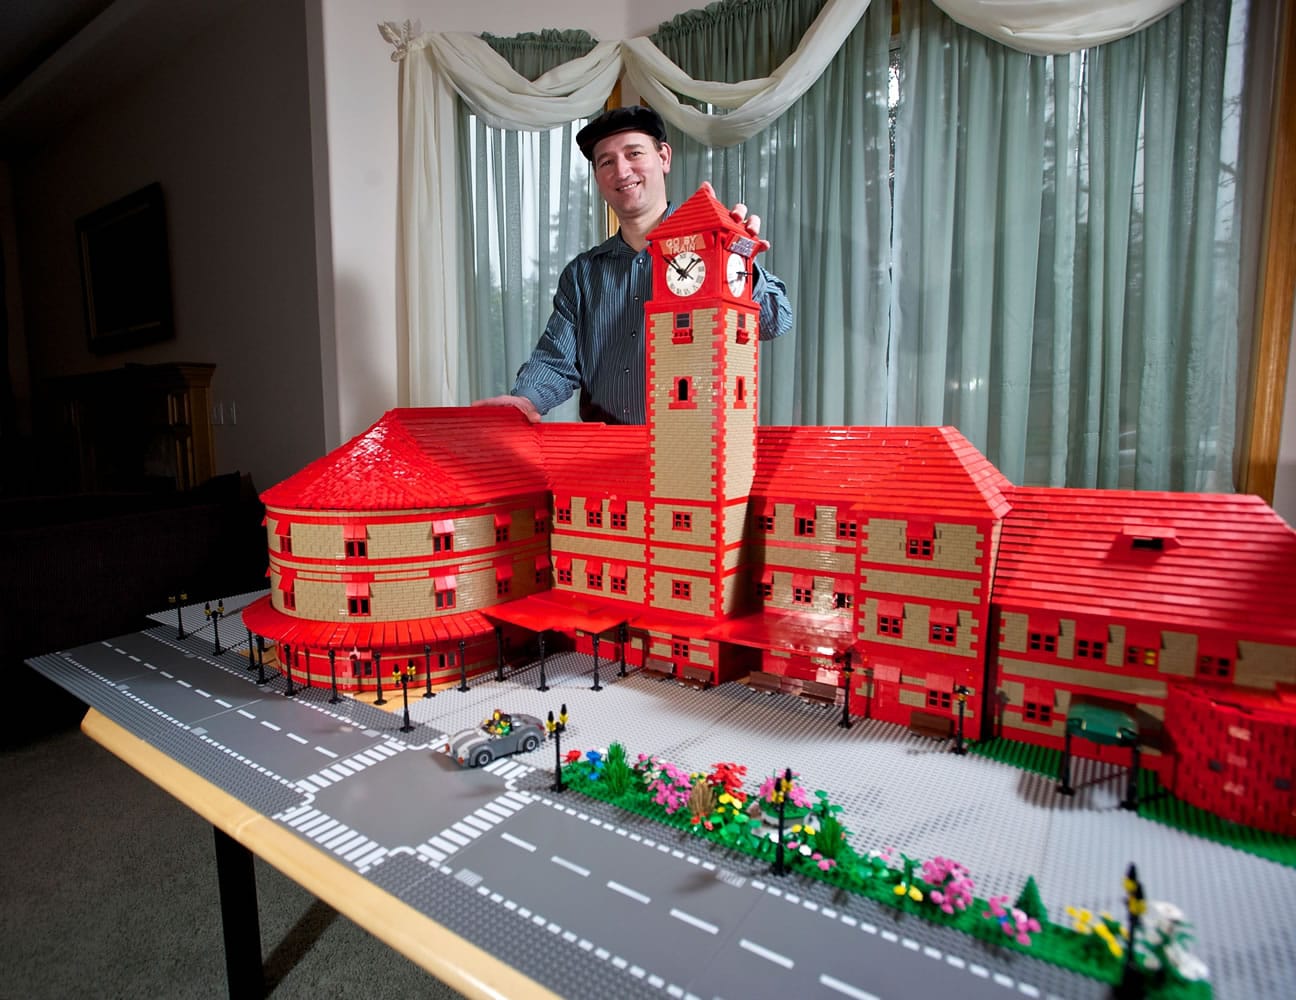 Vancouver's Thomas Prill created a Lego version of Union Station in Portland.